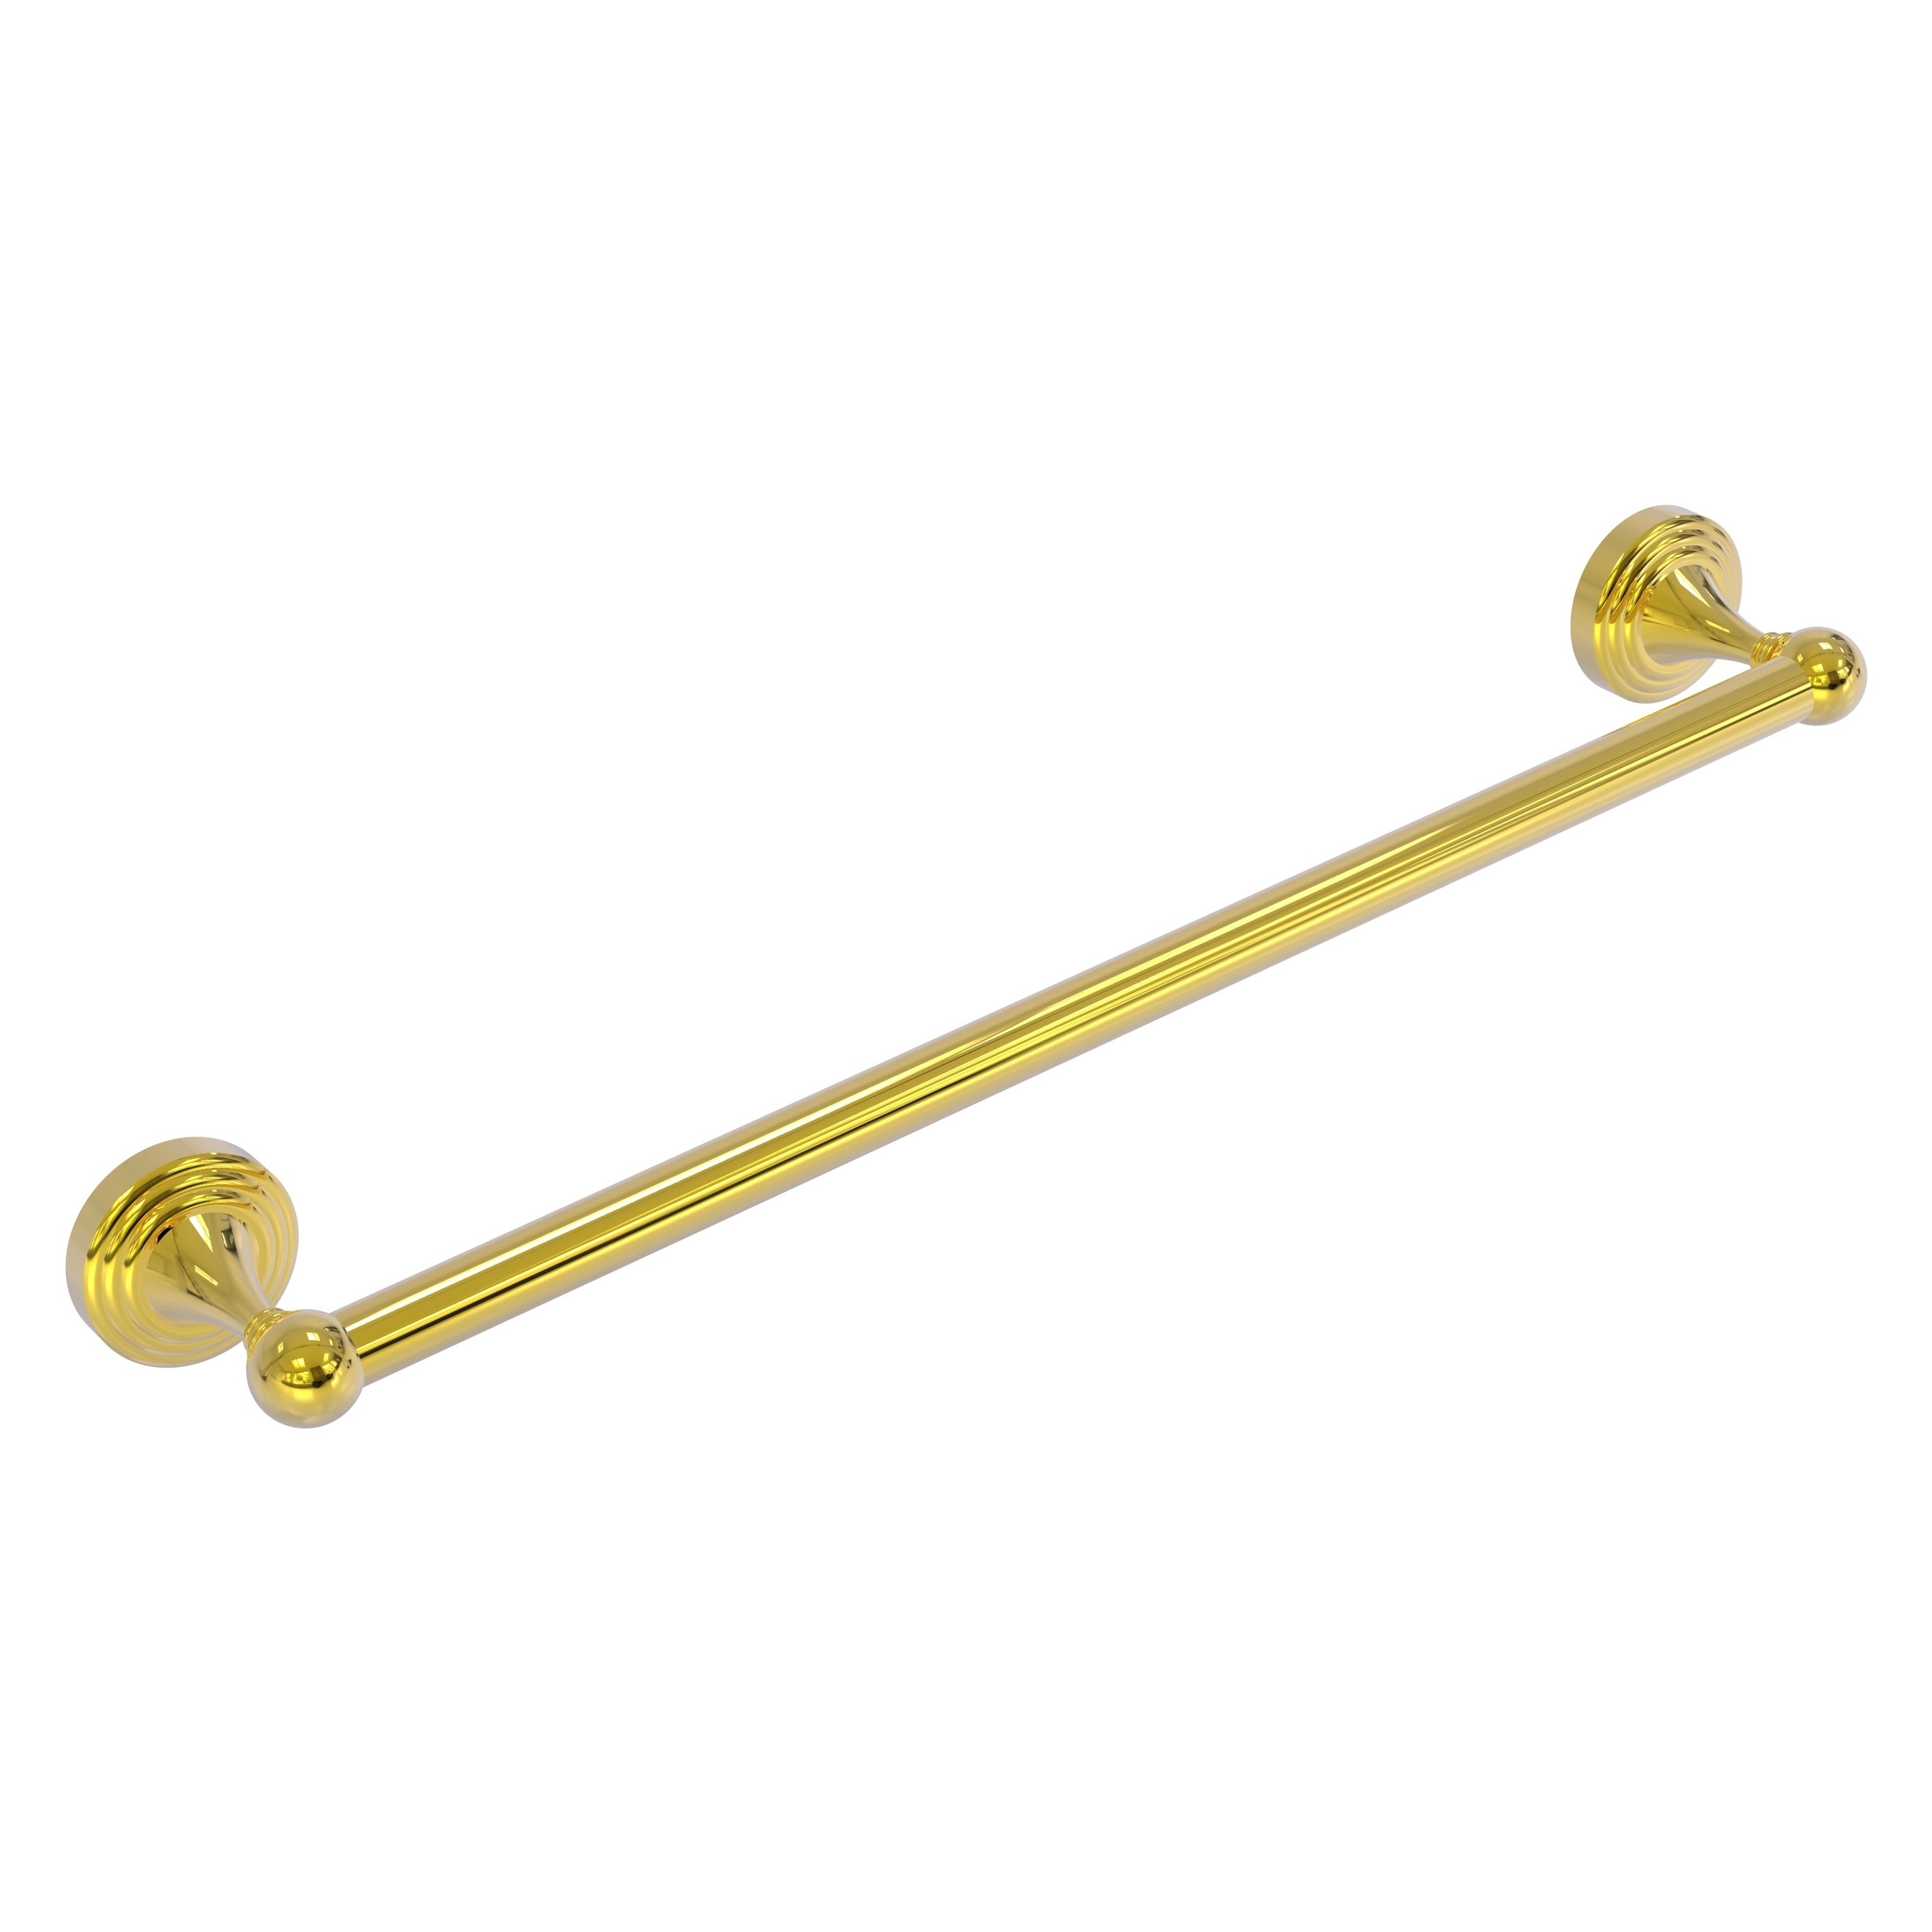 Allied Brass Sag Harbor Collection 36 Inch Towel Bar - On Sale